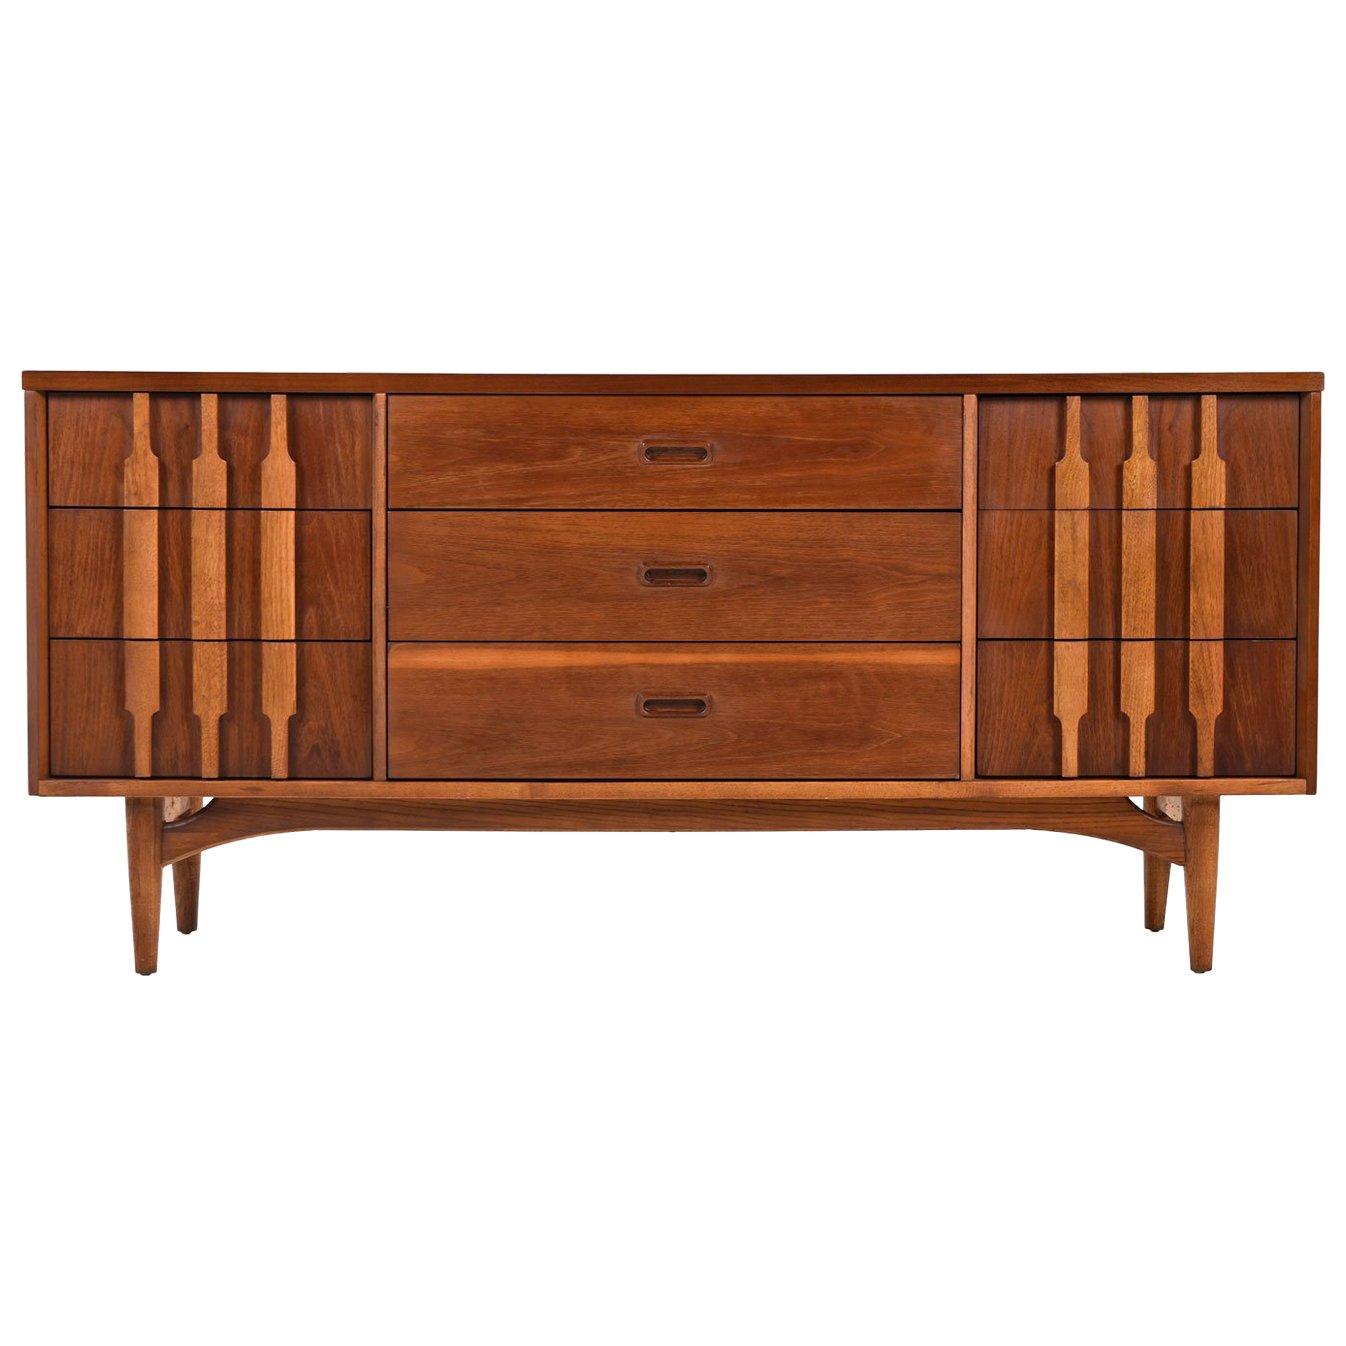 Dresser:
Mid-Century Modern American made 9-drawer dresser or credenza with oak accents. Made by Kroehler Mfg., circa 1960s. This stunning dresser features sculpted paddle shaped pulls on the drawers that perfectly contrast and compliment the